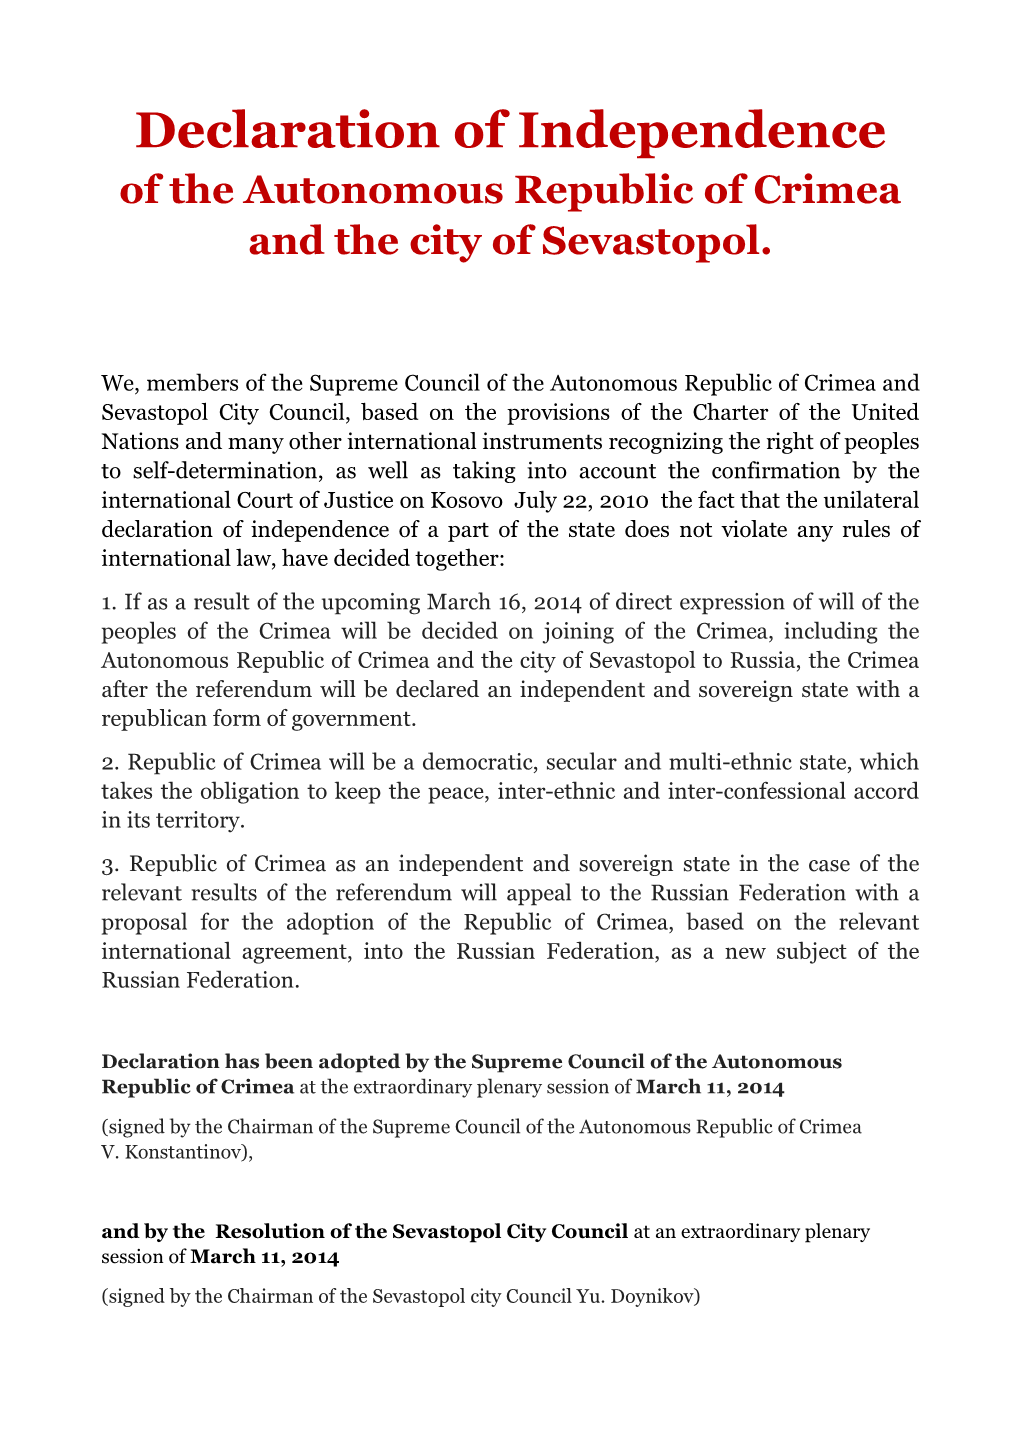 Declaration of Independence of the Autonomous Republic of Crimea and the City of Sevastopol